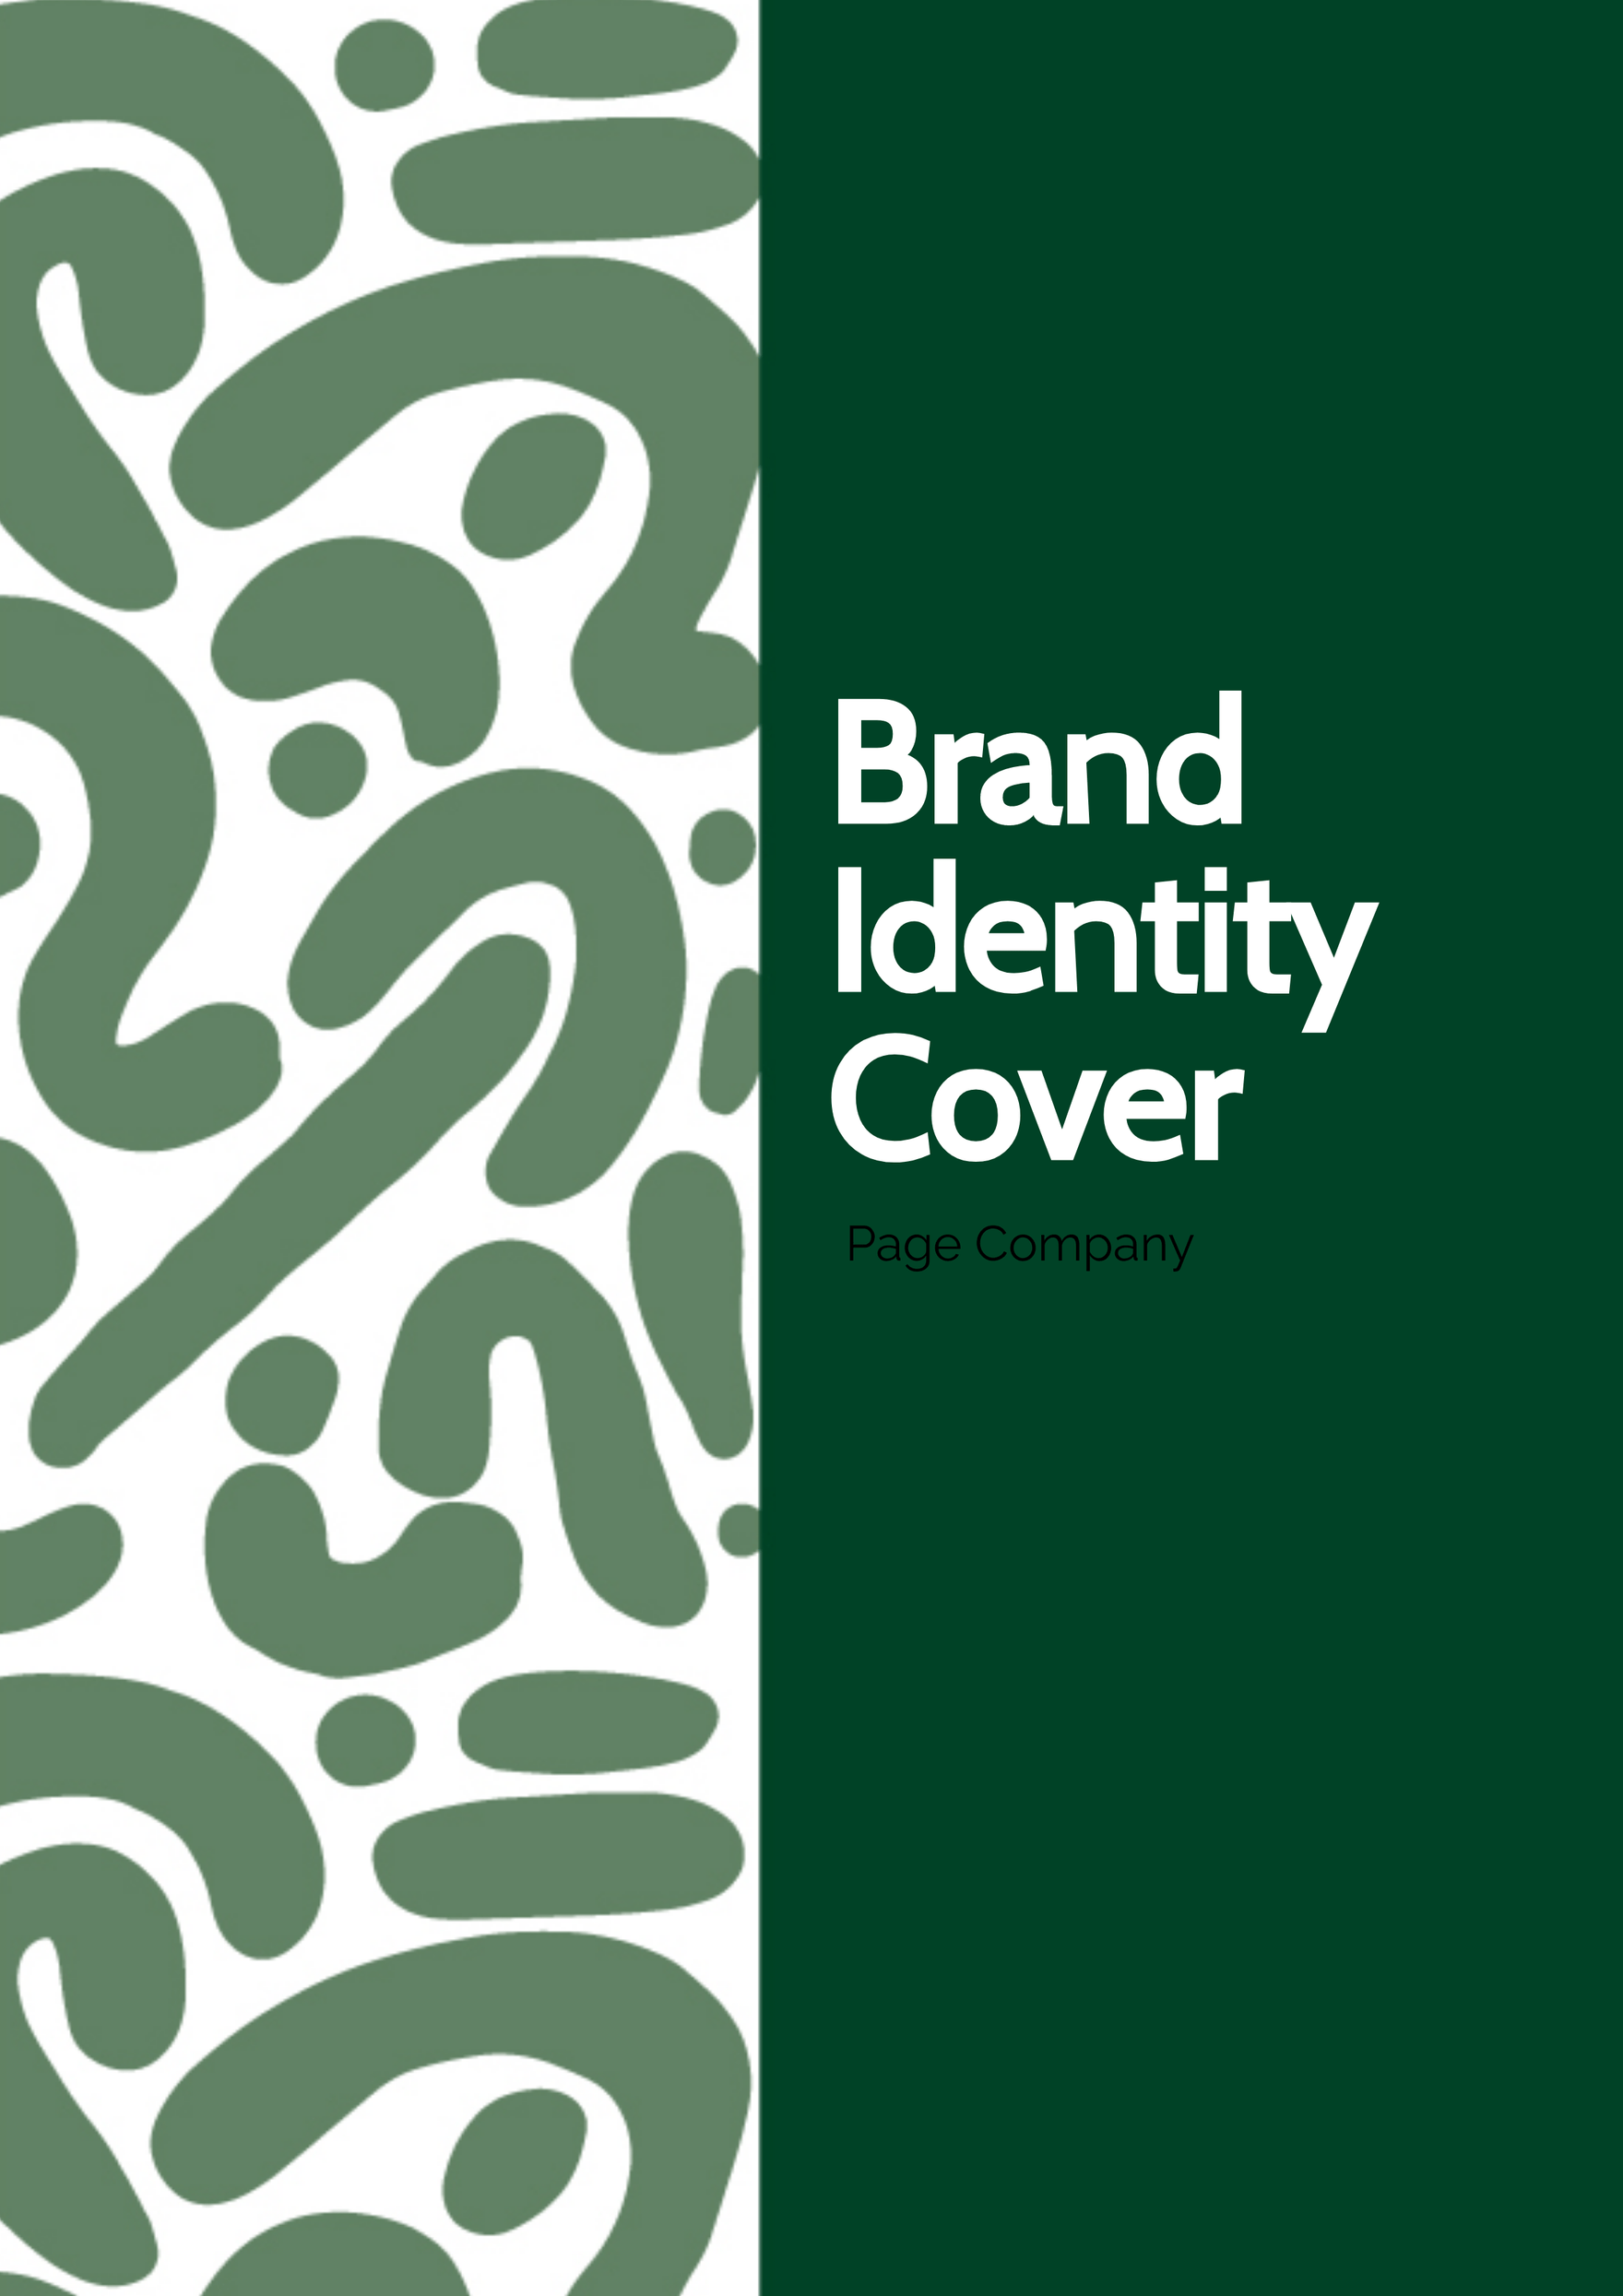 Brand Identity Cover Page Company